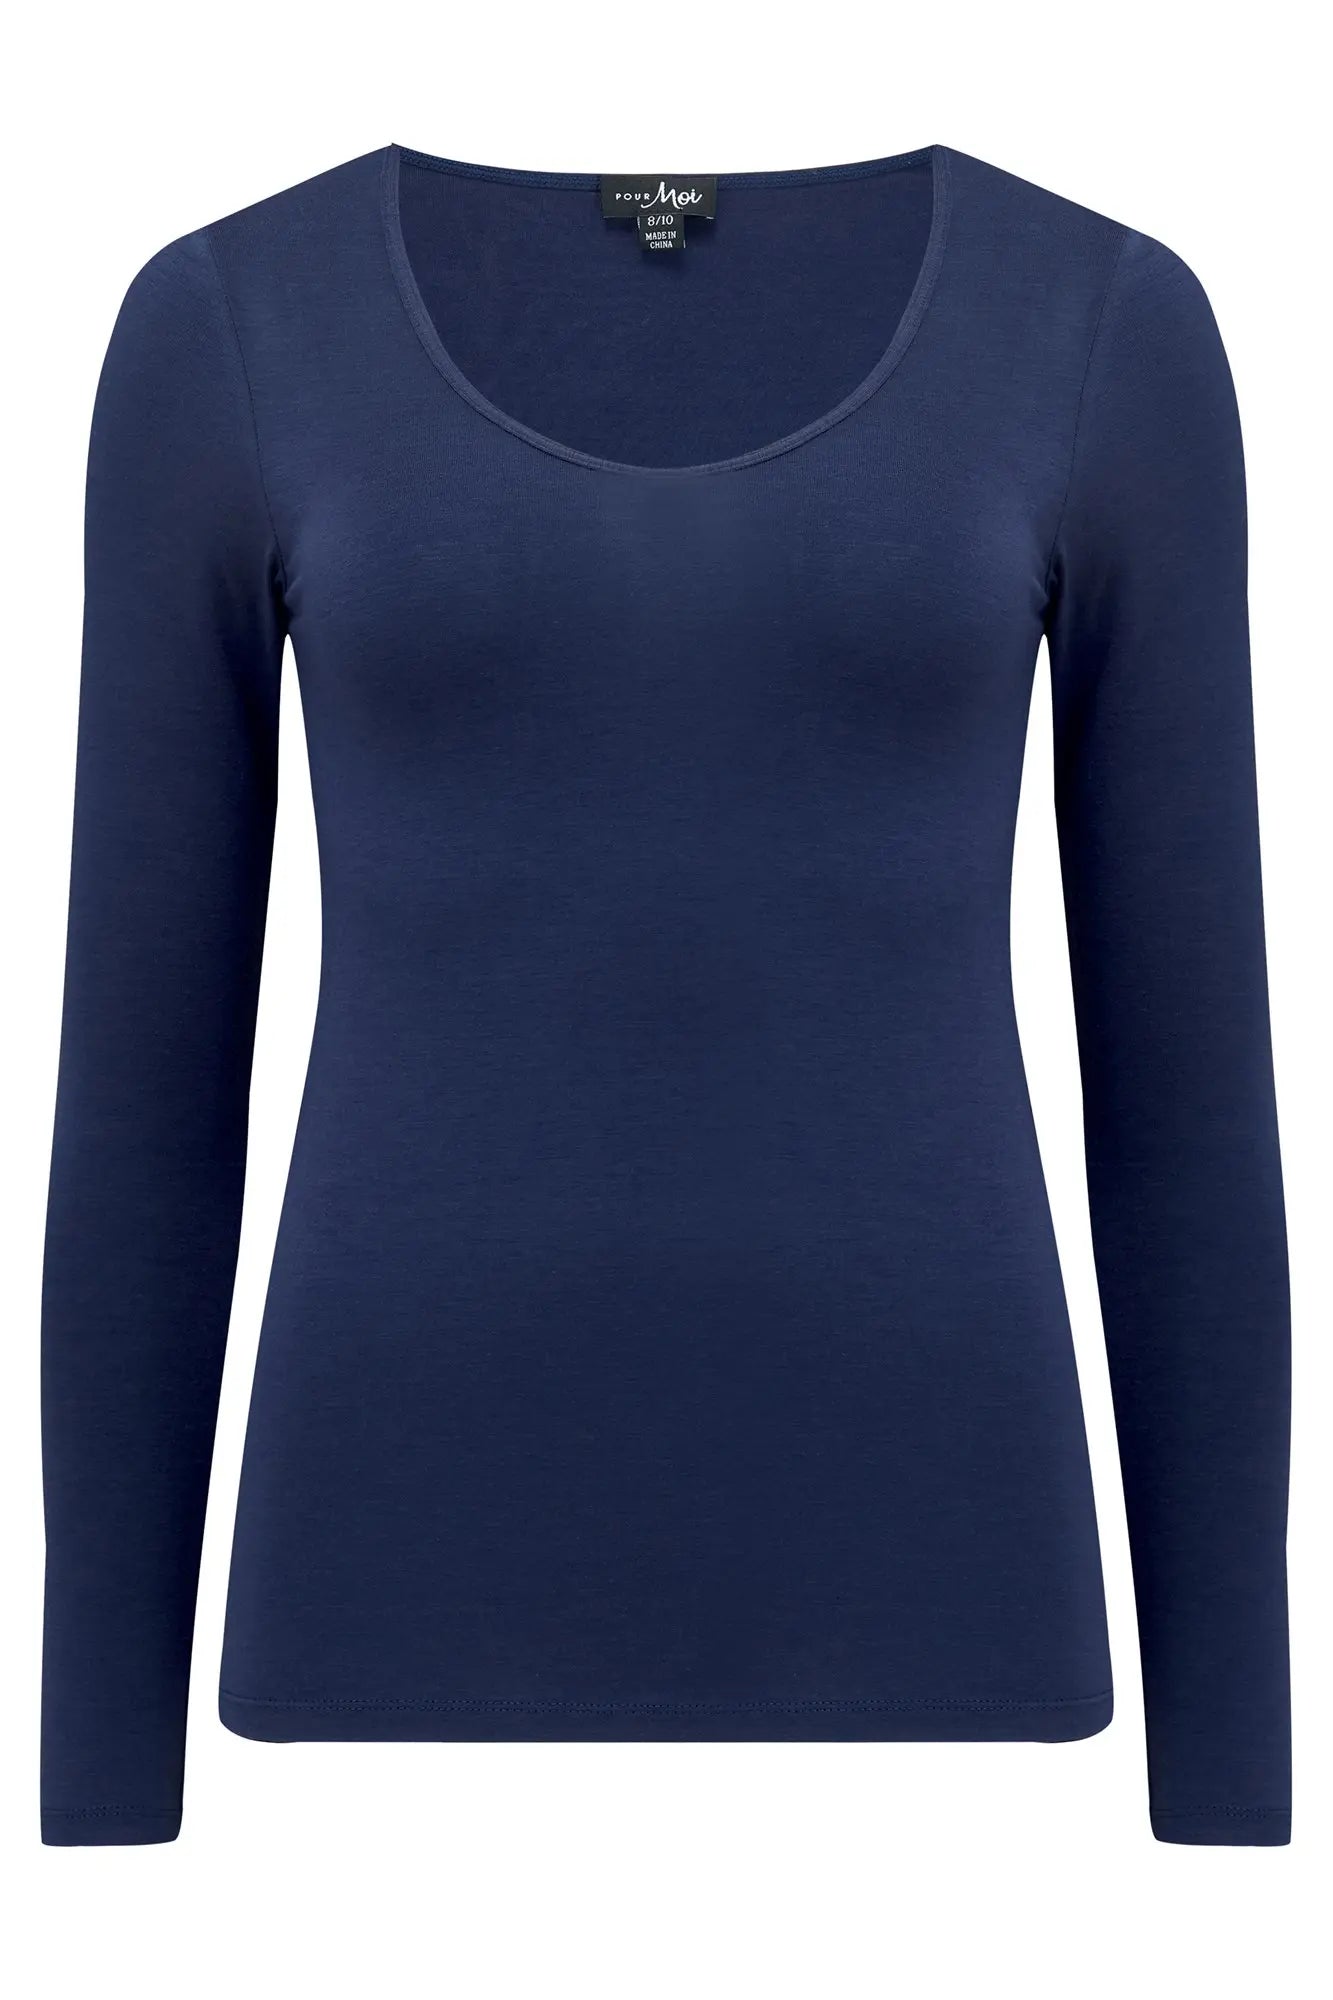 Pour Moi-Thermal Long Sleeve Top-Blue